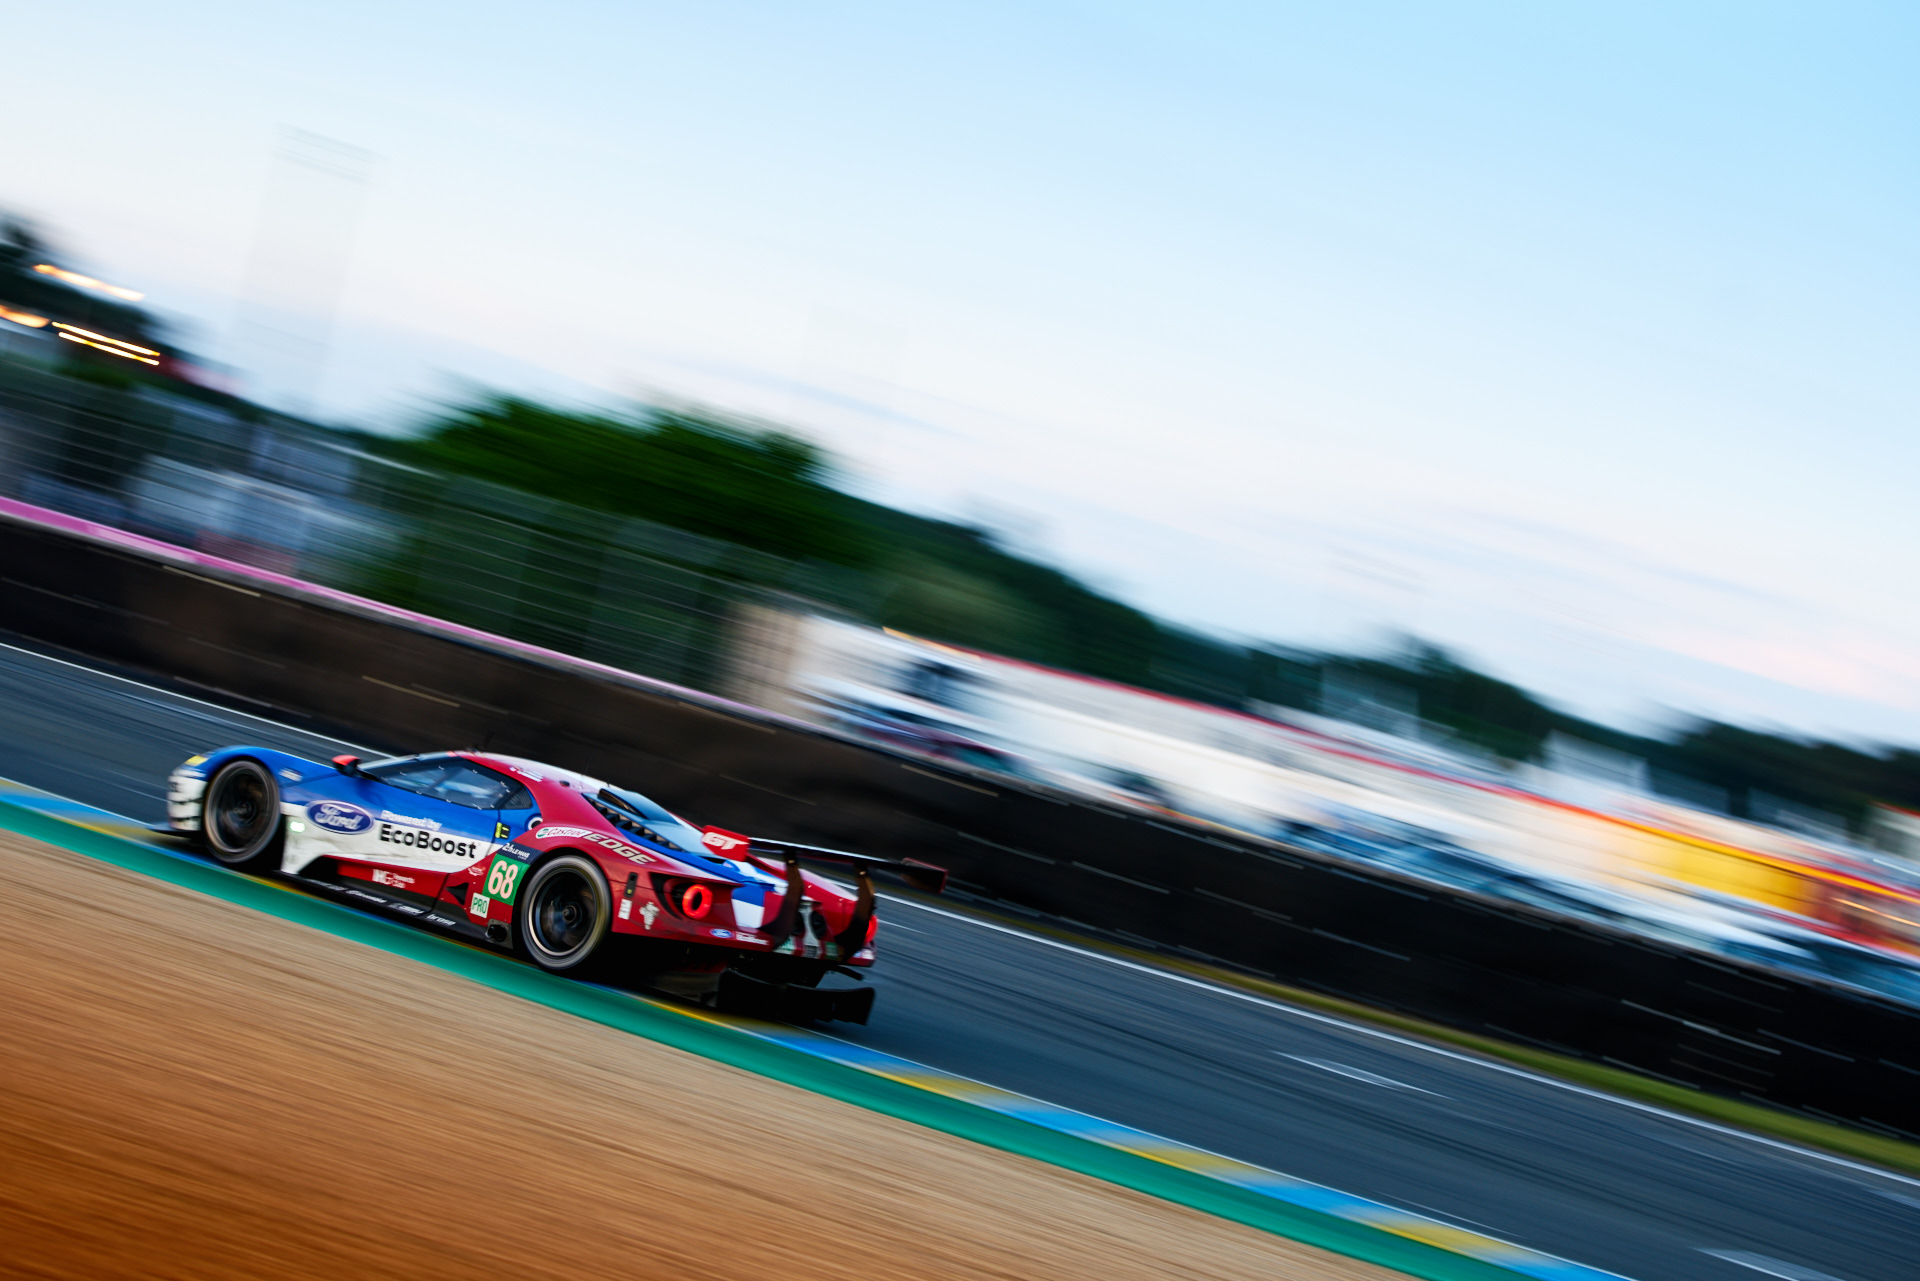 Ford GT at the Le Mans 24 hours